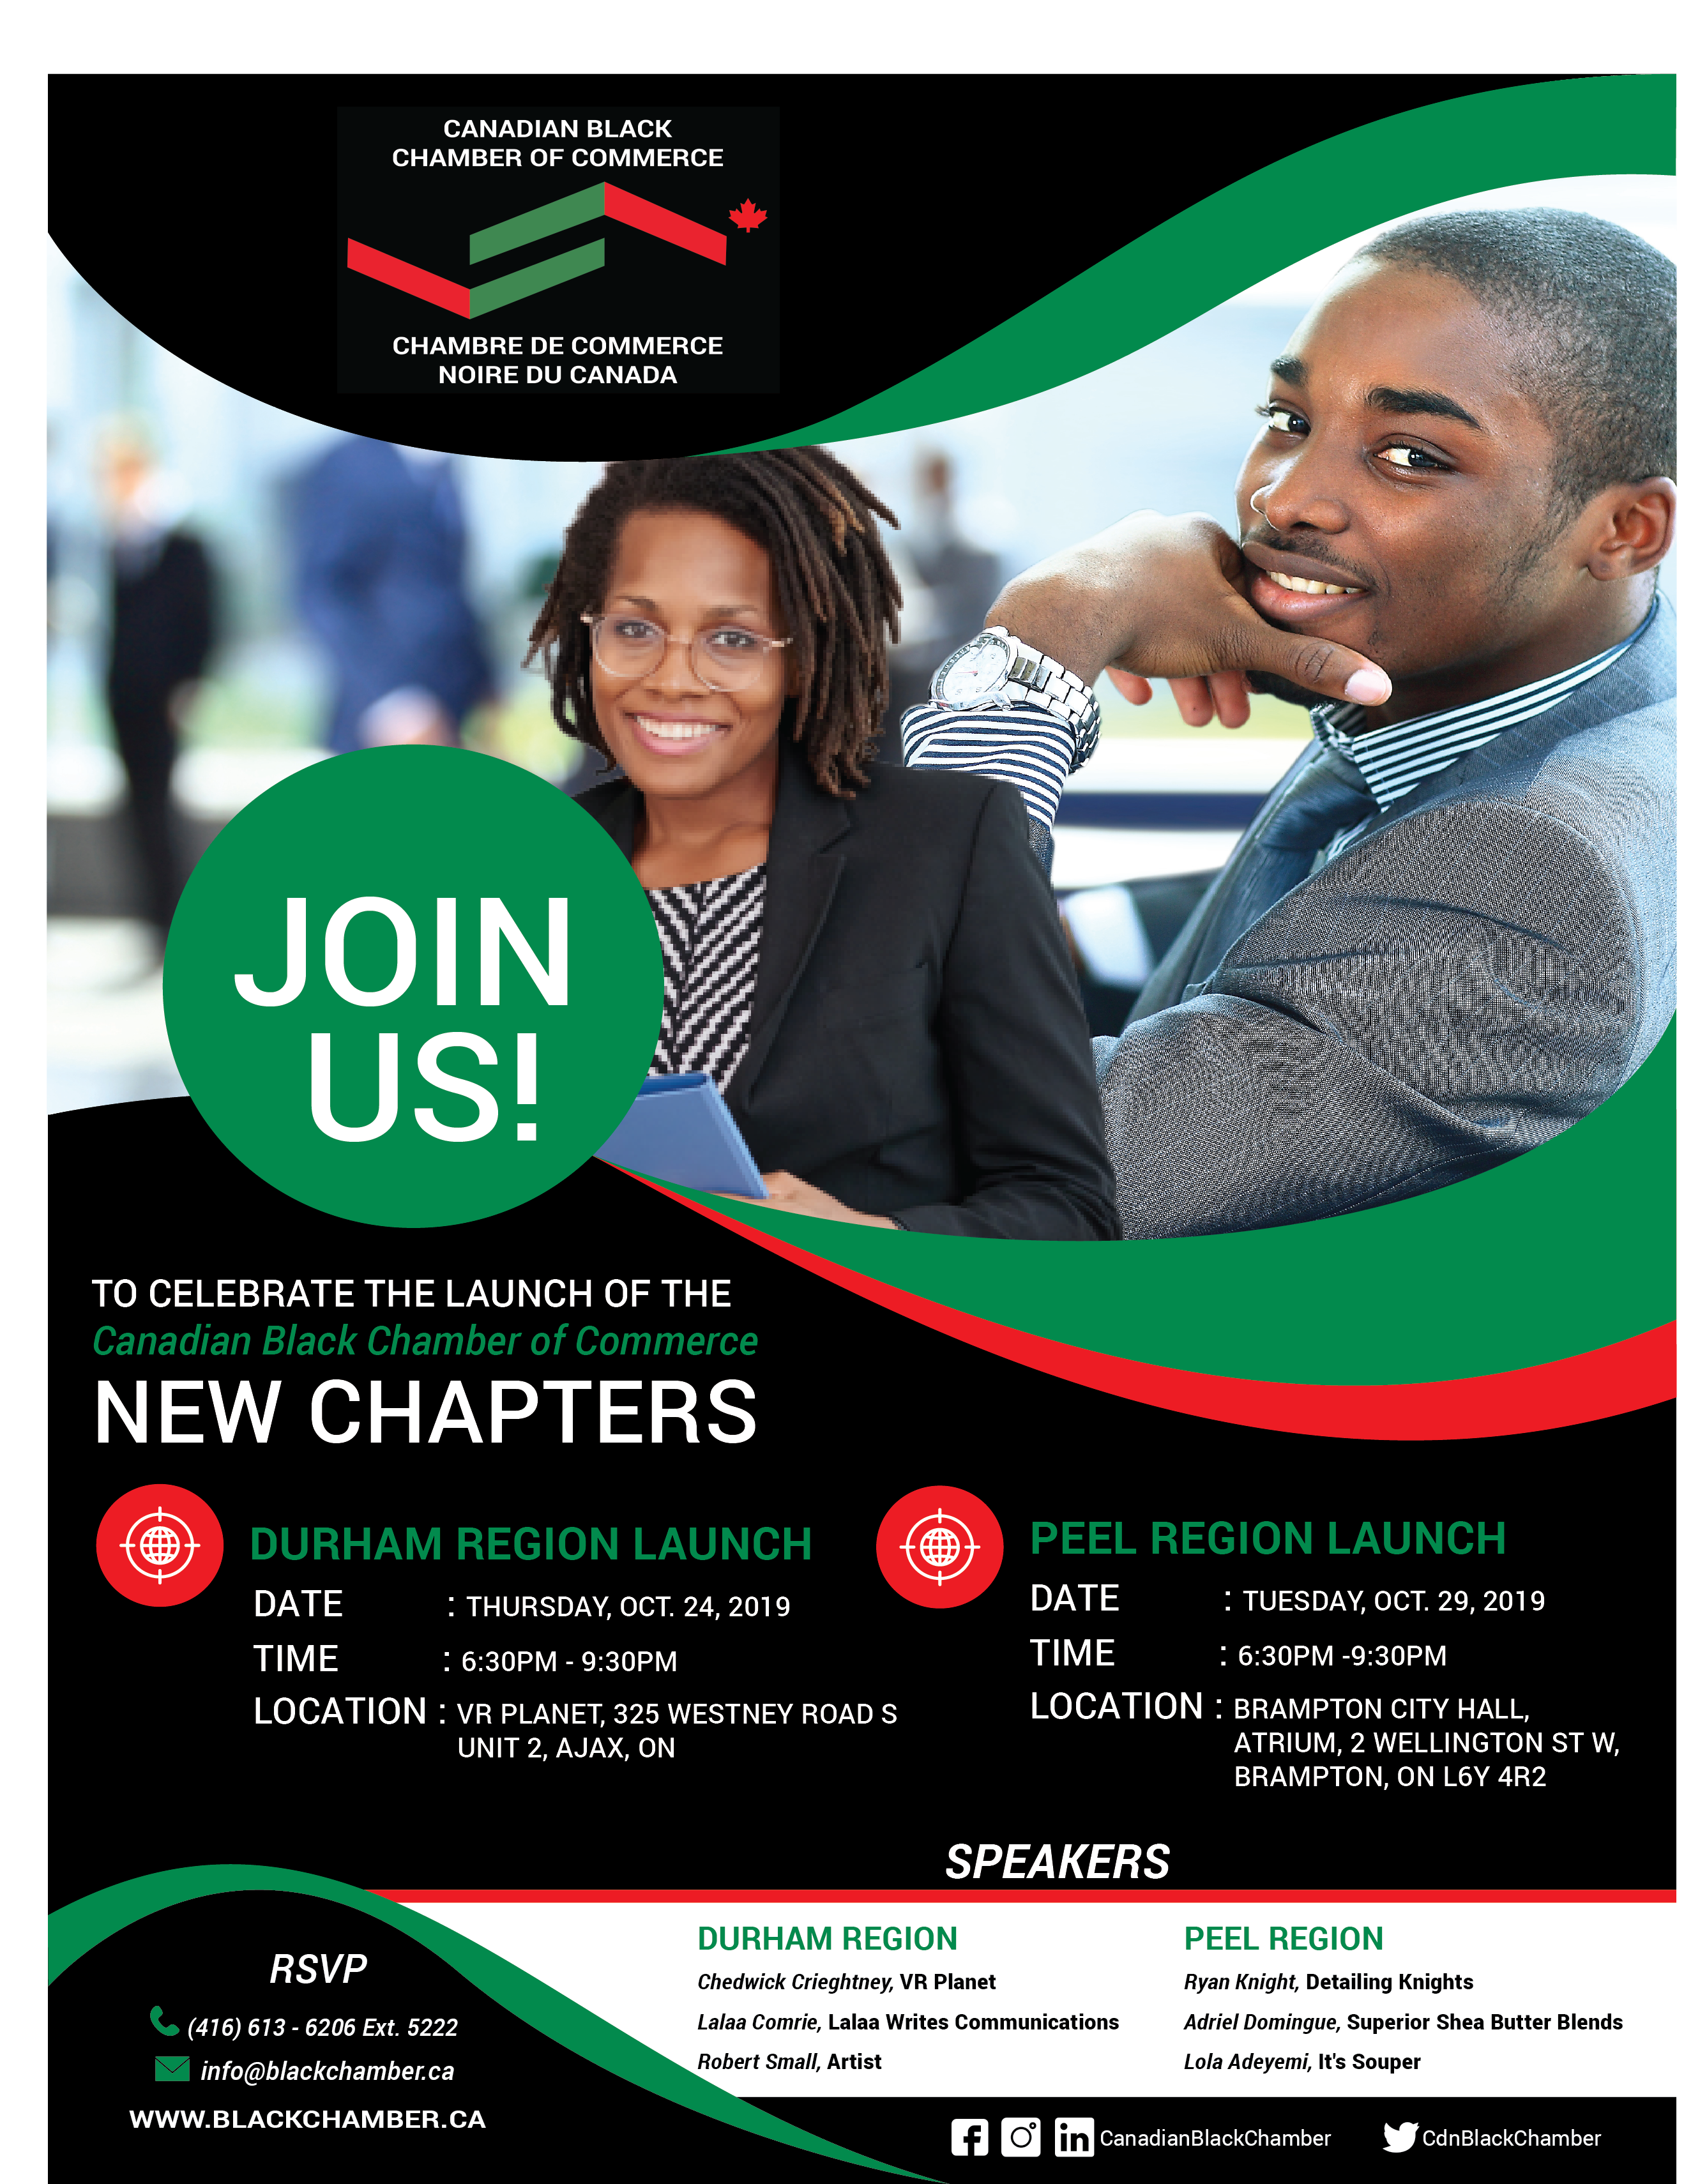 https://afrotoronto.com/events-list/525-canadian-black-chamber-of-commerce-durham-region-launch flyer